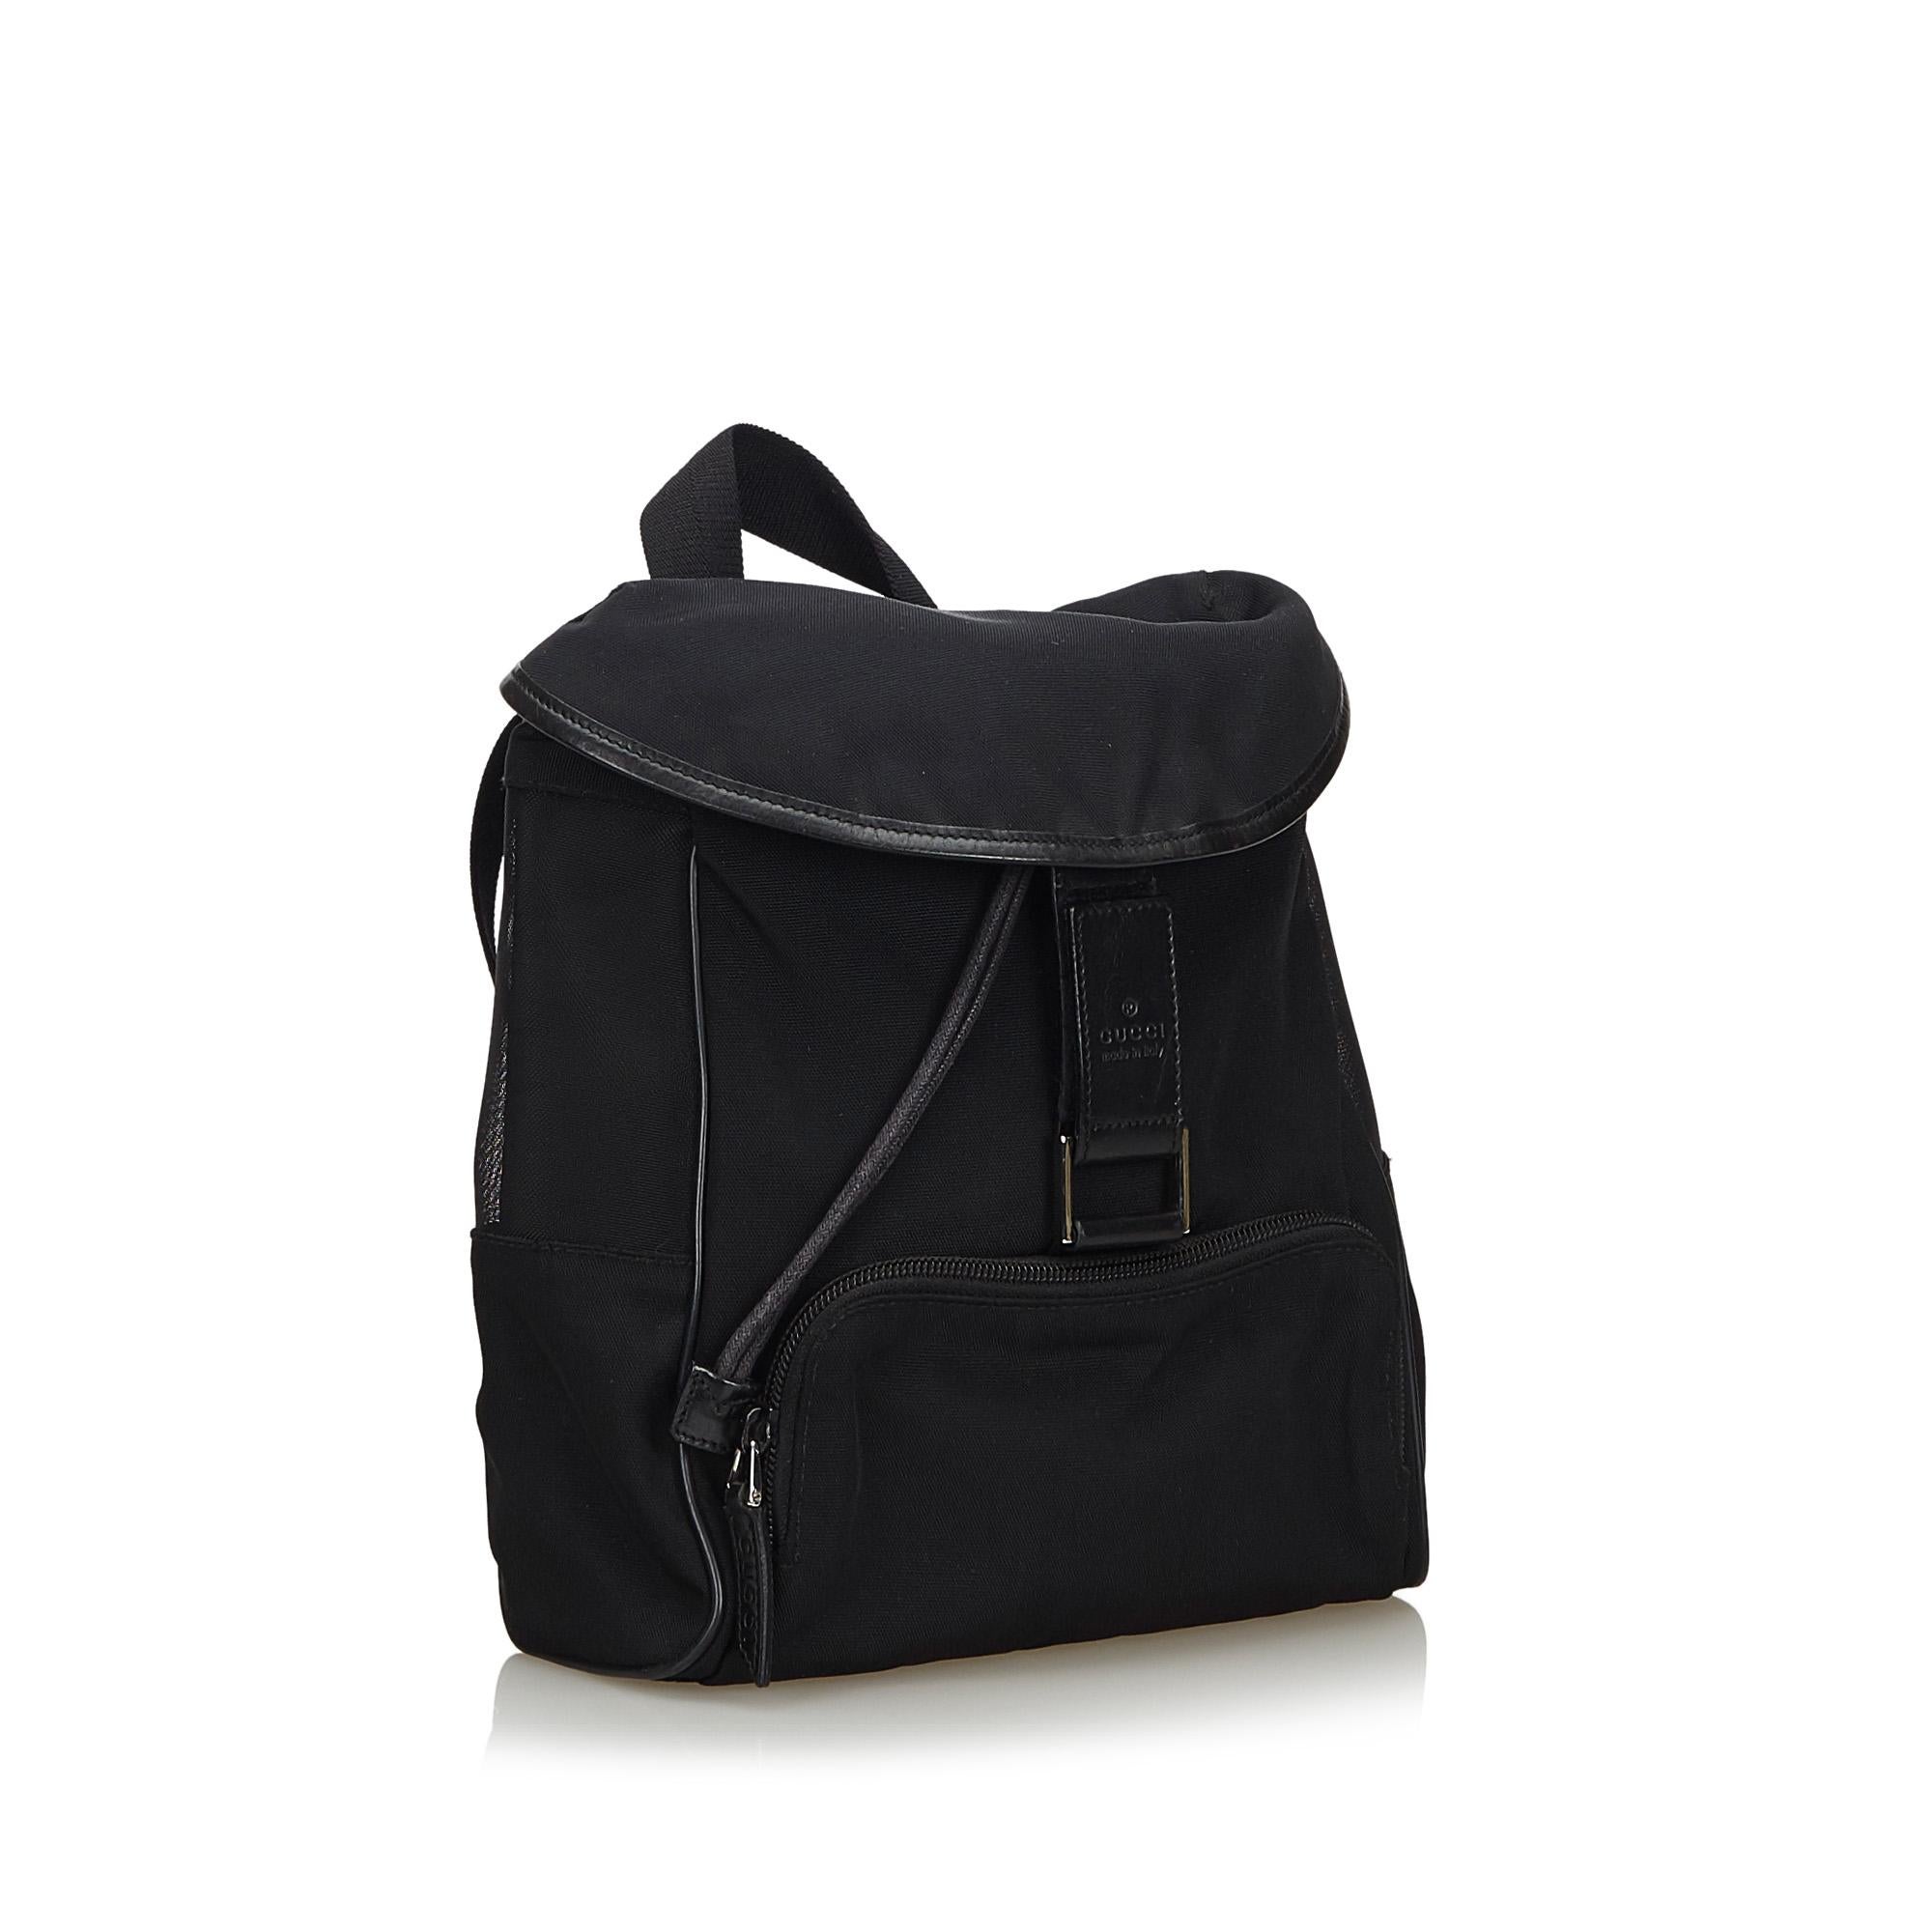 This backpack features a canvas body with mesh panels and leather trim, front exterior zip pocket, flat top handle, flat back straps, top flap with velcro closure, and interior zip pocket. It carries as B+ condition rating.

Inclusions: 
This item